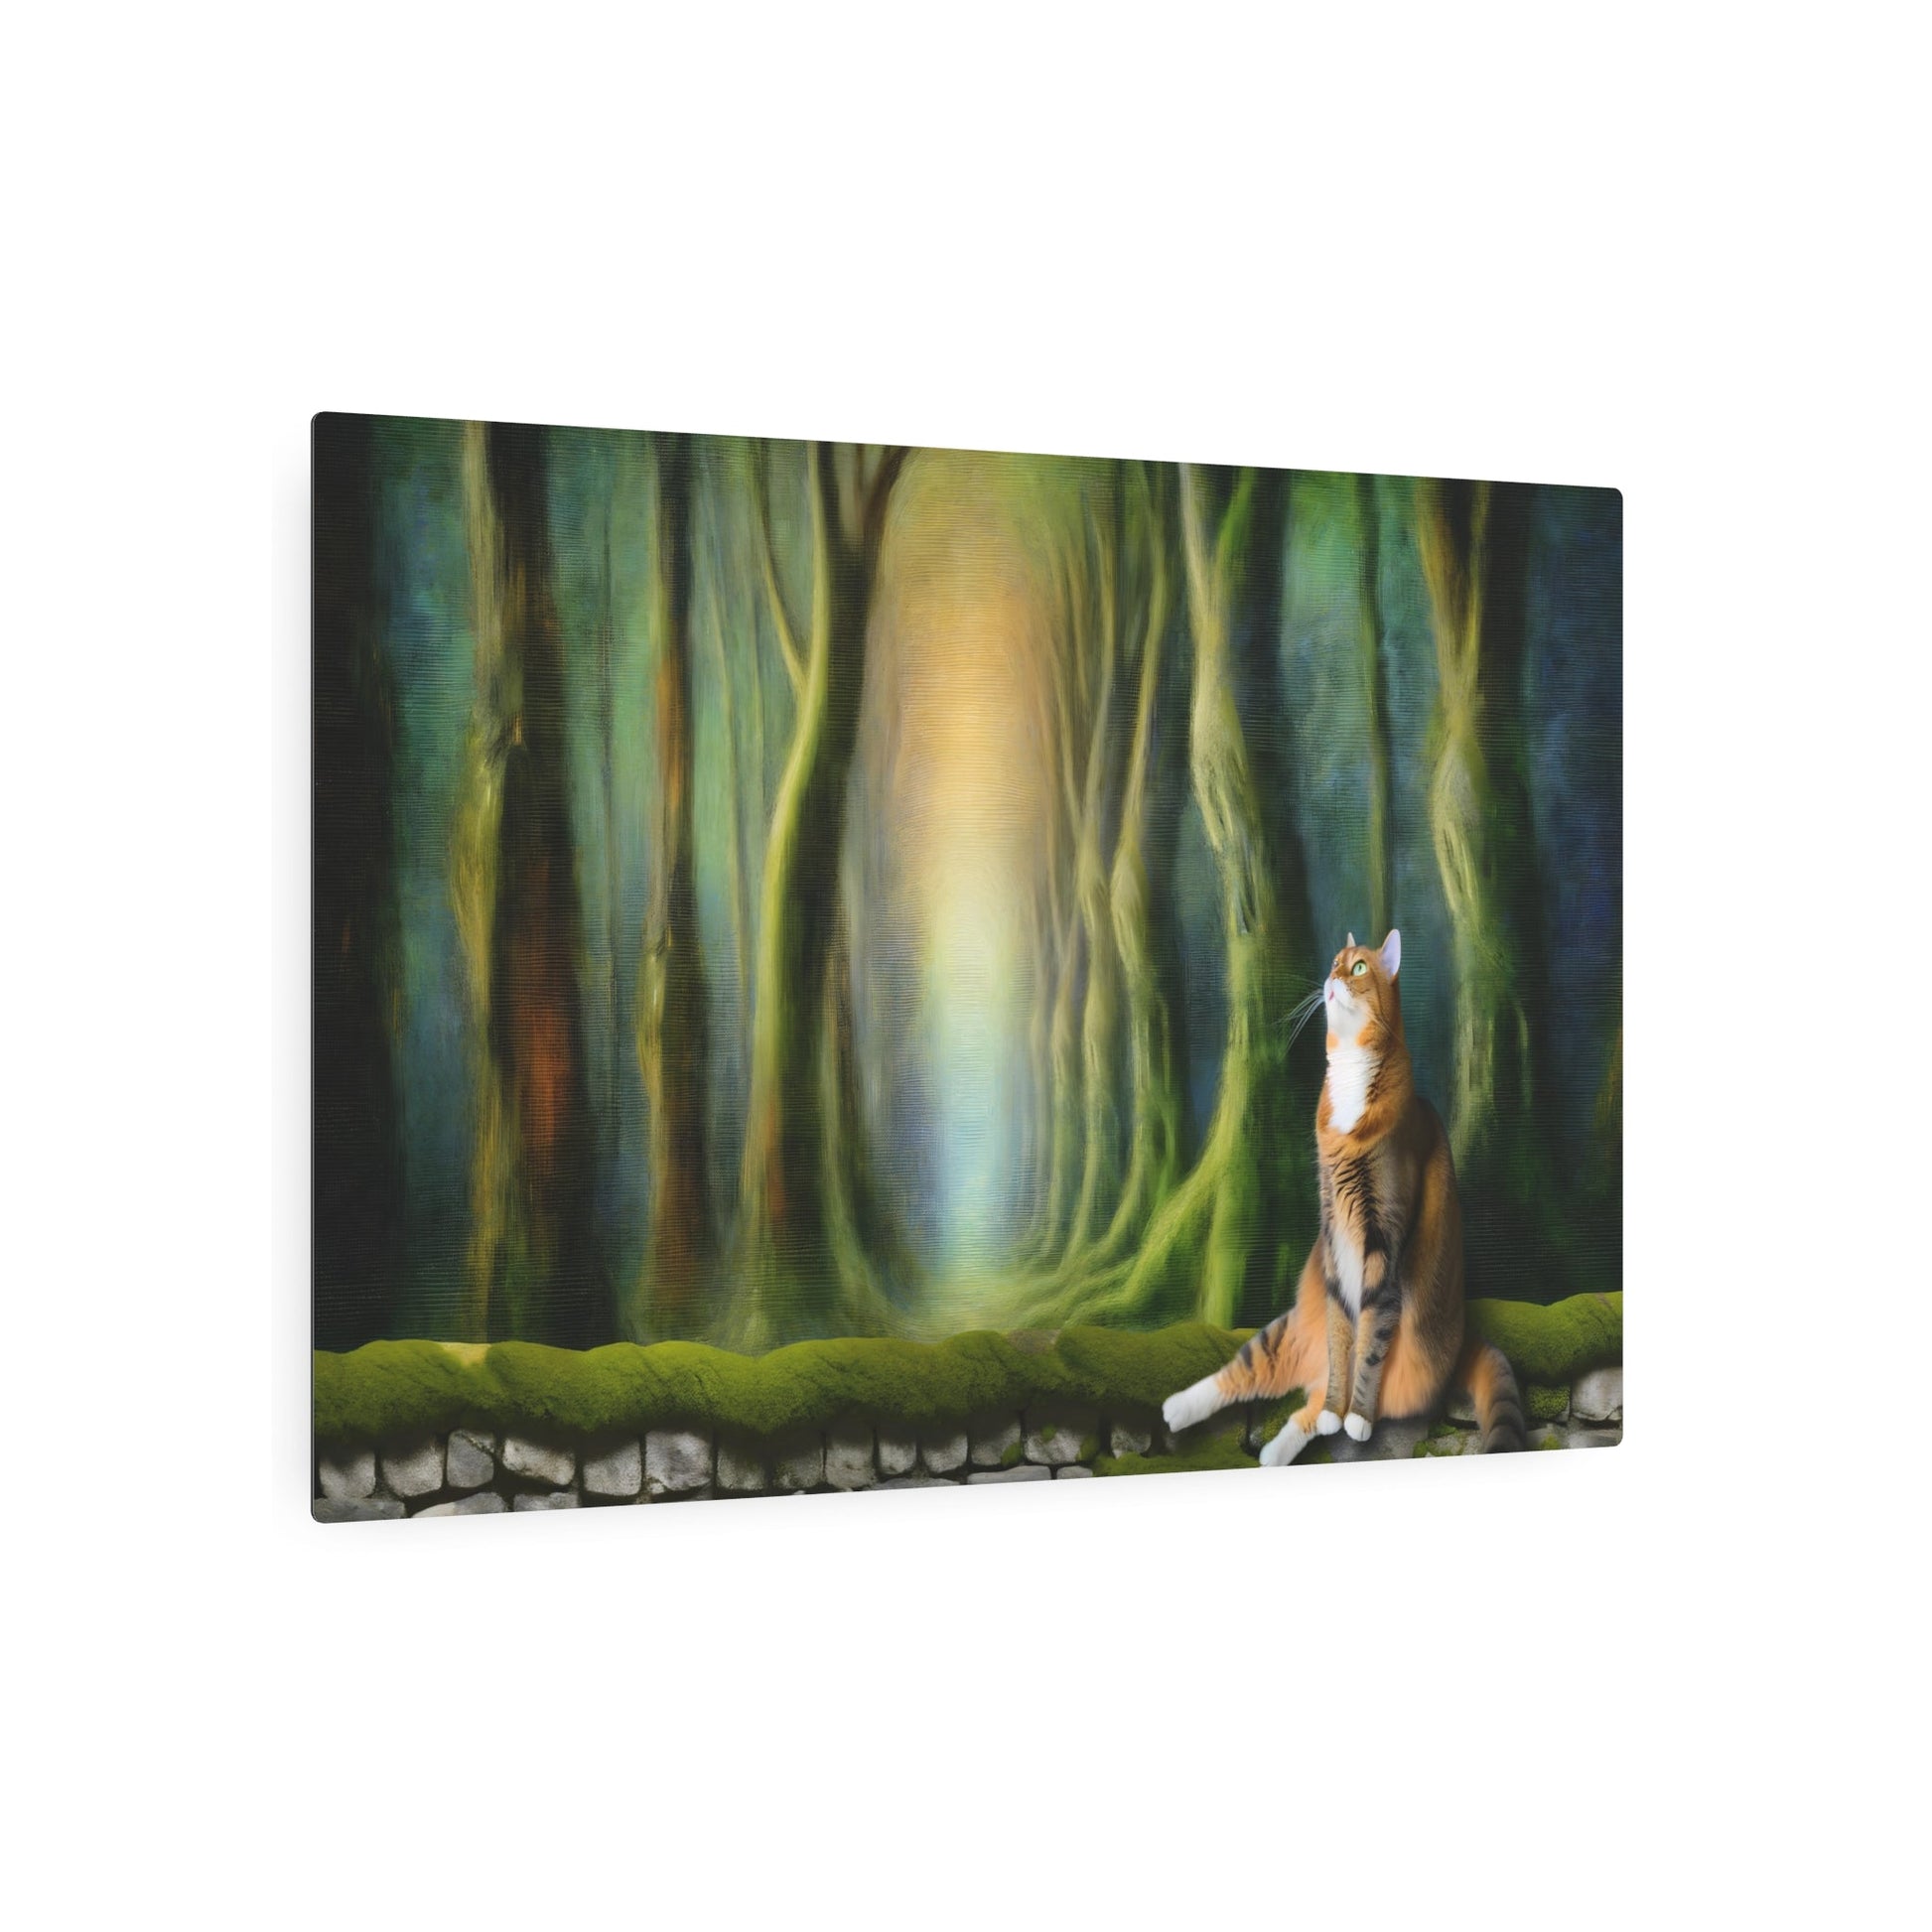 Metal Poster Art | "Enchanting Romanticism Art Painting - Majestic Cat on Ancient Stone Wall Amid Ethereal Forest Glow - Dramatic Emotion in Western Art Styles - Metal Poster Art 36″ x 24″ (Horizontal) 0.12''